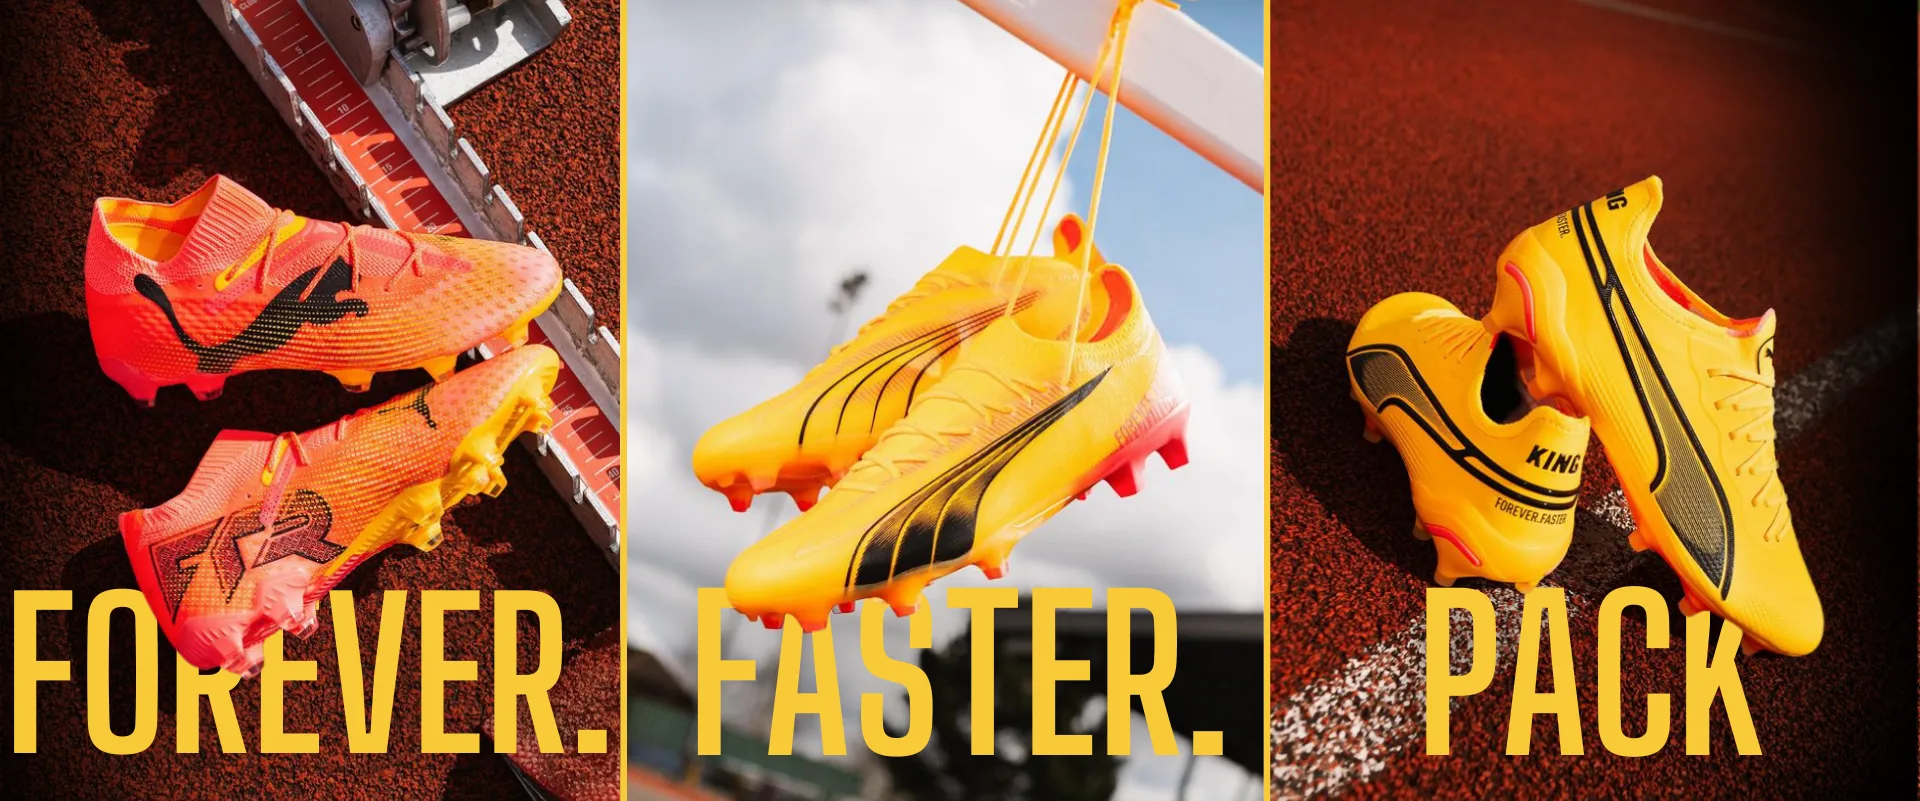 Puma - Forever. Faster. Pack